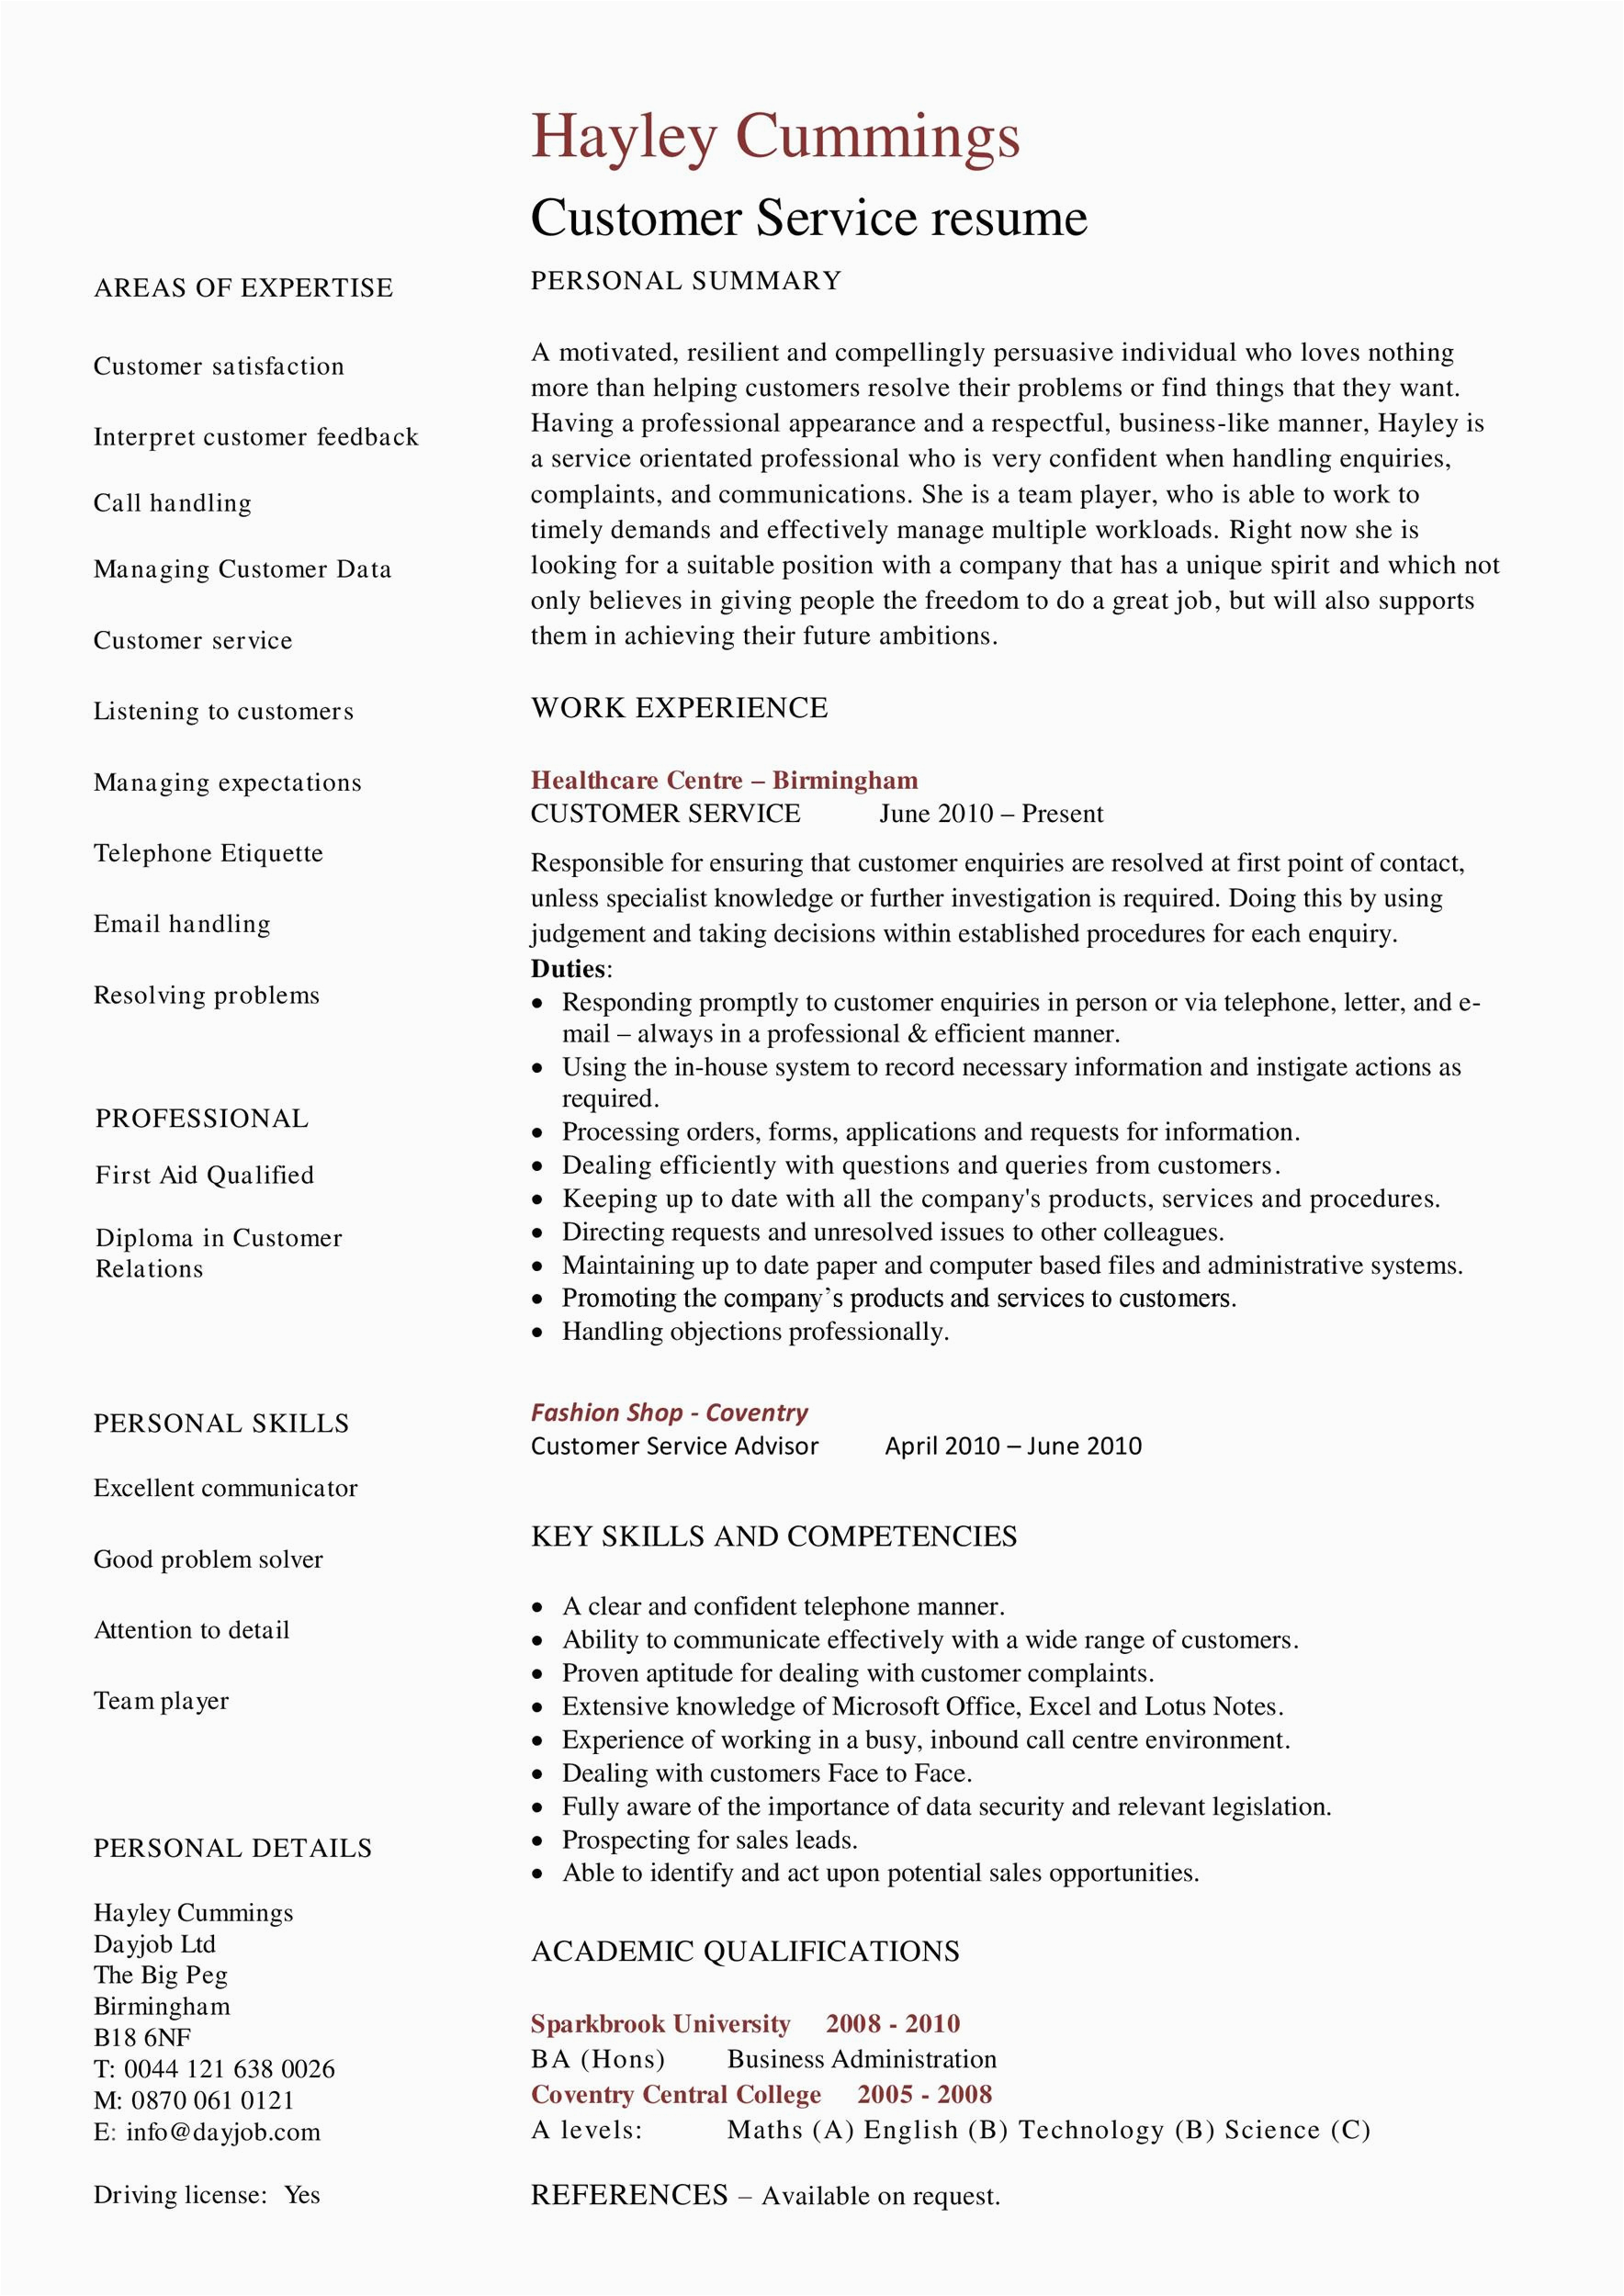 Free Resume Templates for Customer Service Jobs 30 Customer Service Resume Examples Templatelab